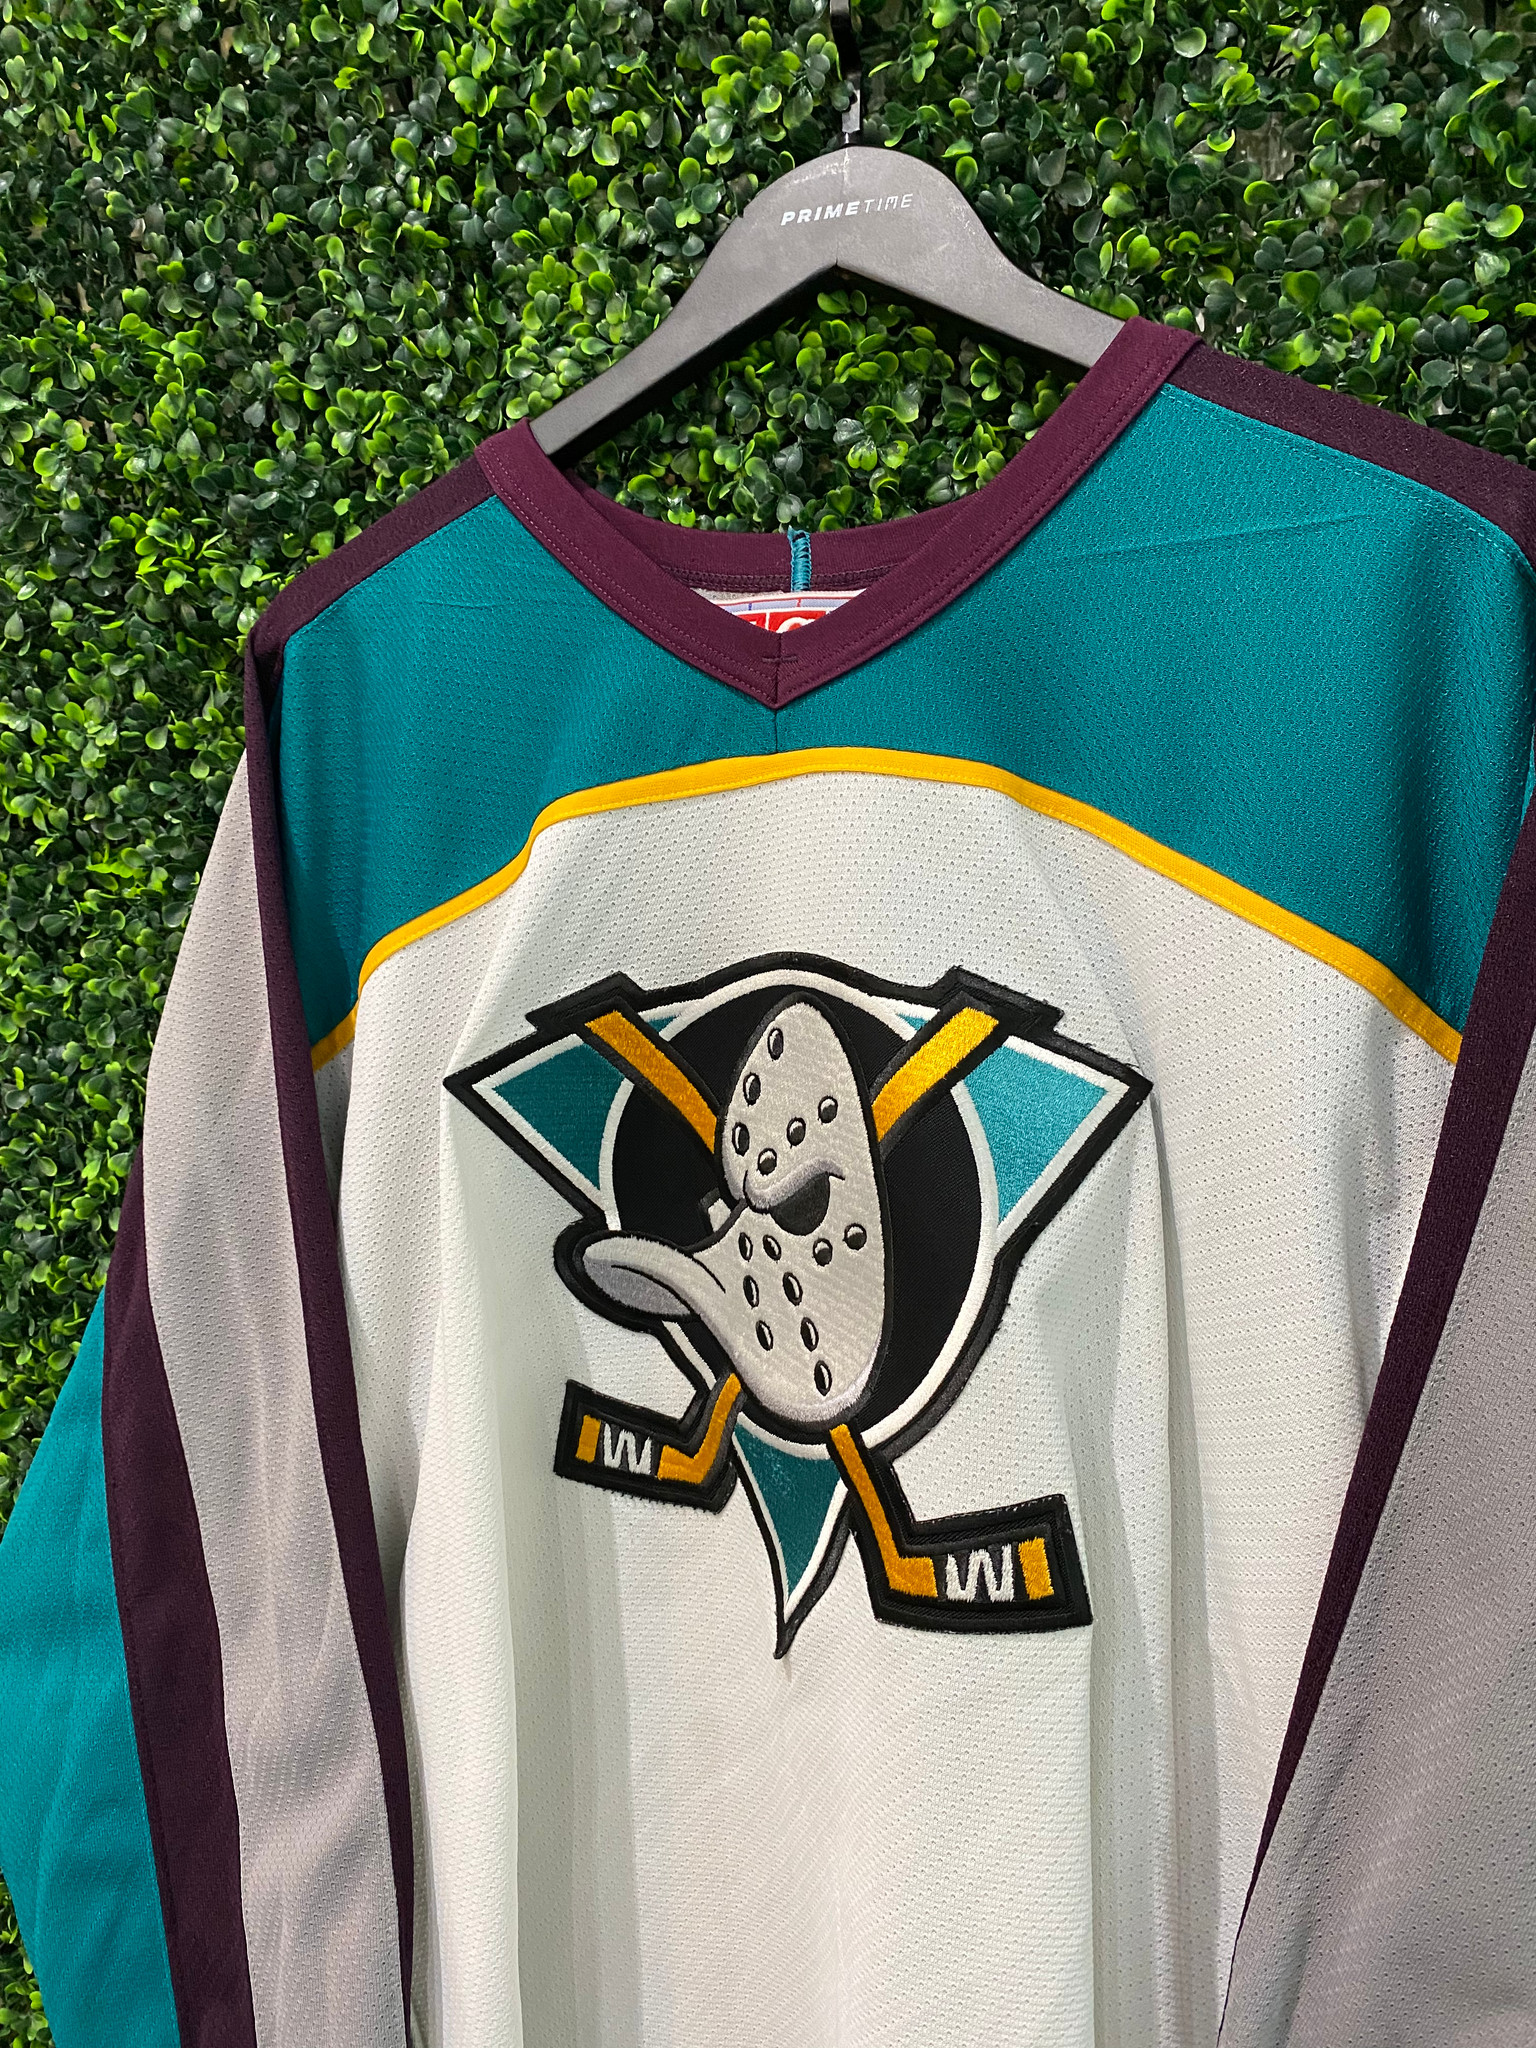 Mighty Ducks Purple Throwback NHL Jersey -Tackle twill logos -100